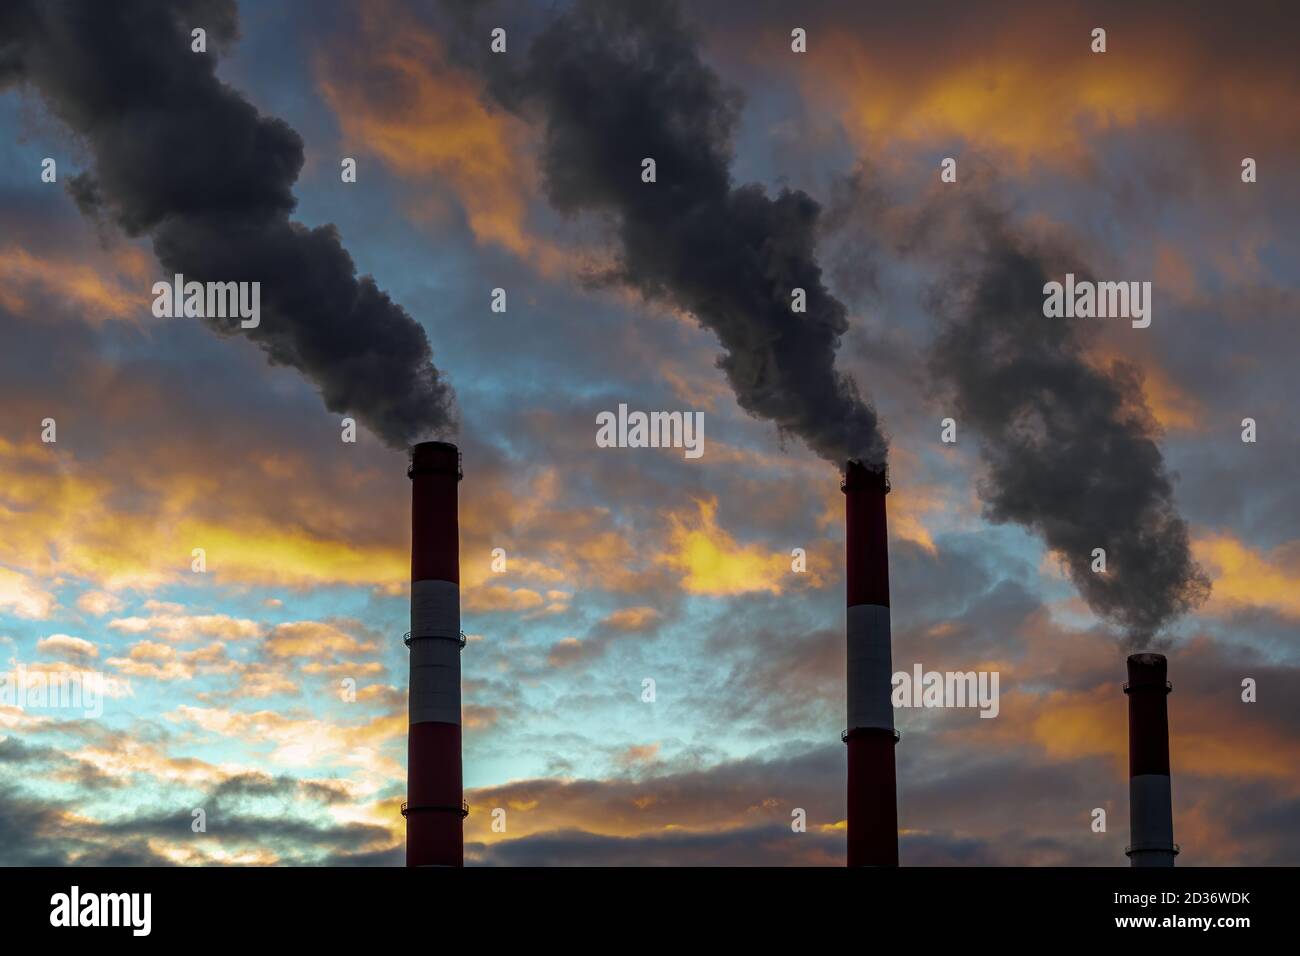 Three smoked pipes on dramatic colorful sky background. Air pollution concept Stock Photo